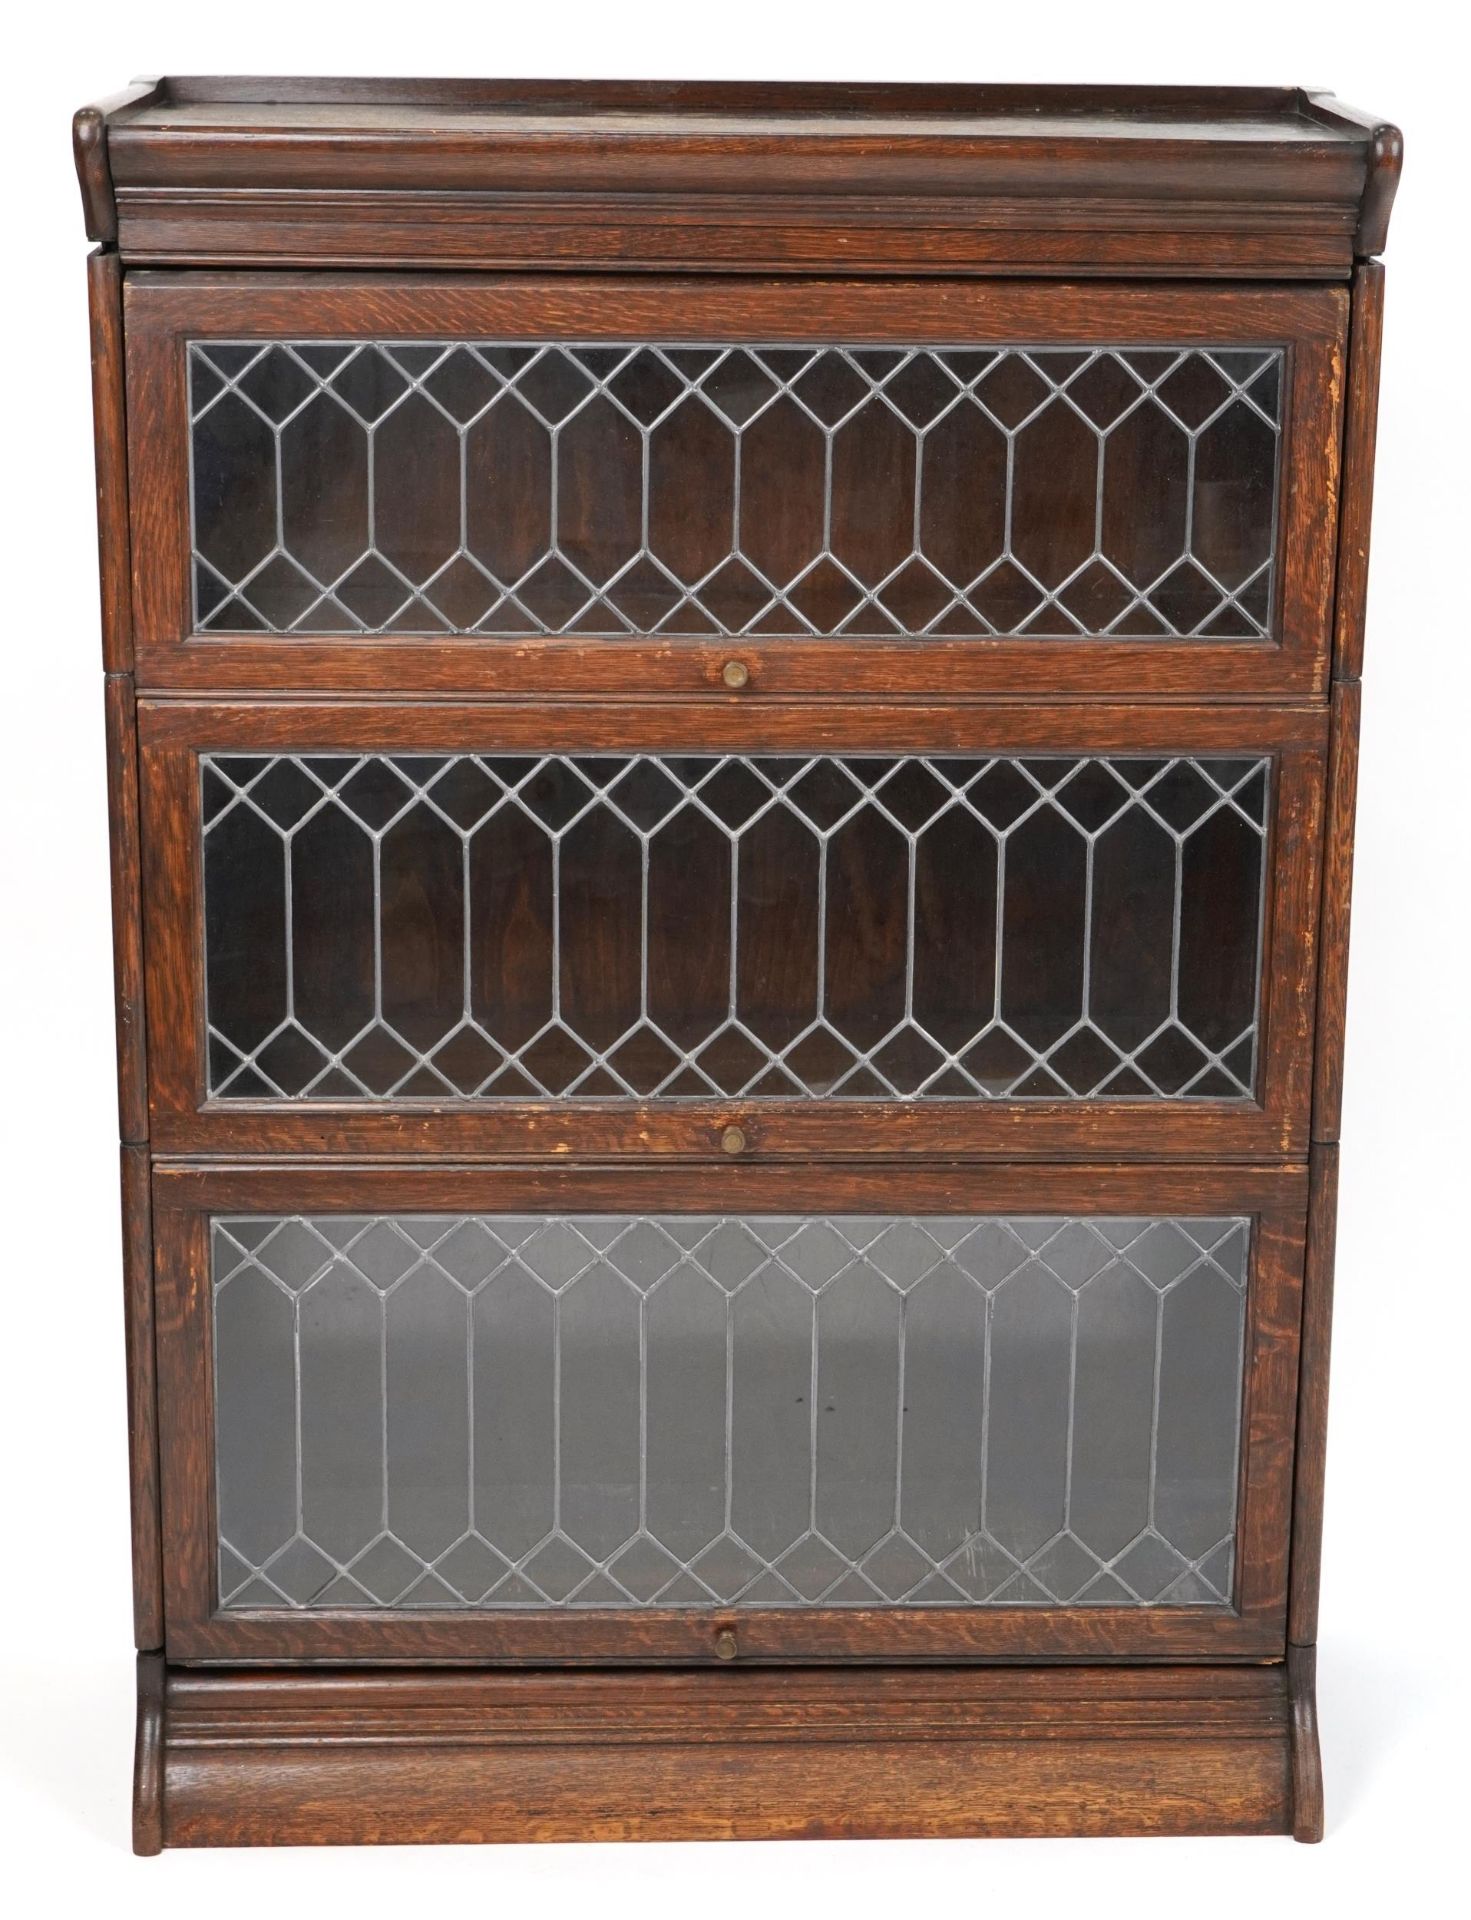 Oak Globe Wernicke style three section bookcase with leaded glass doors, 125cm H x 87cm W x 37cm D